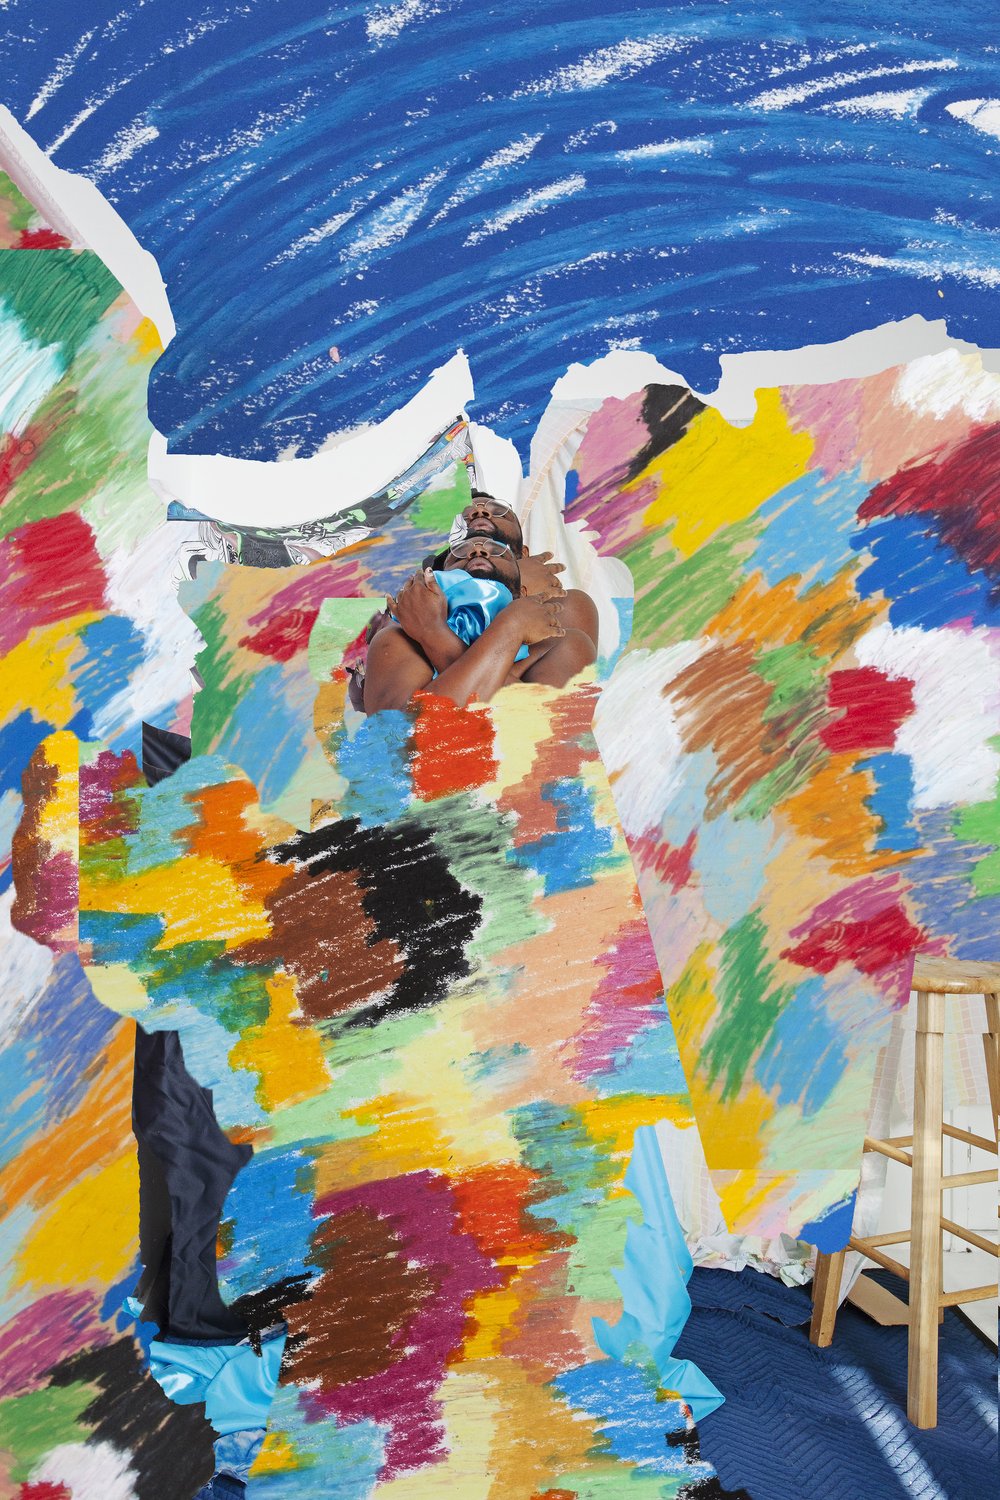 Rakeem Cunningham's Journey from Struggle to Triumph Through Vibrant Art and Self-Discovery